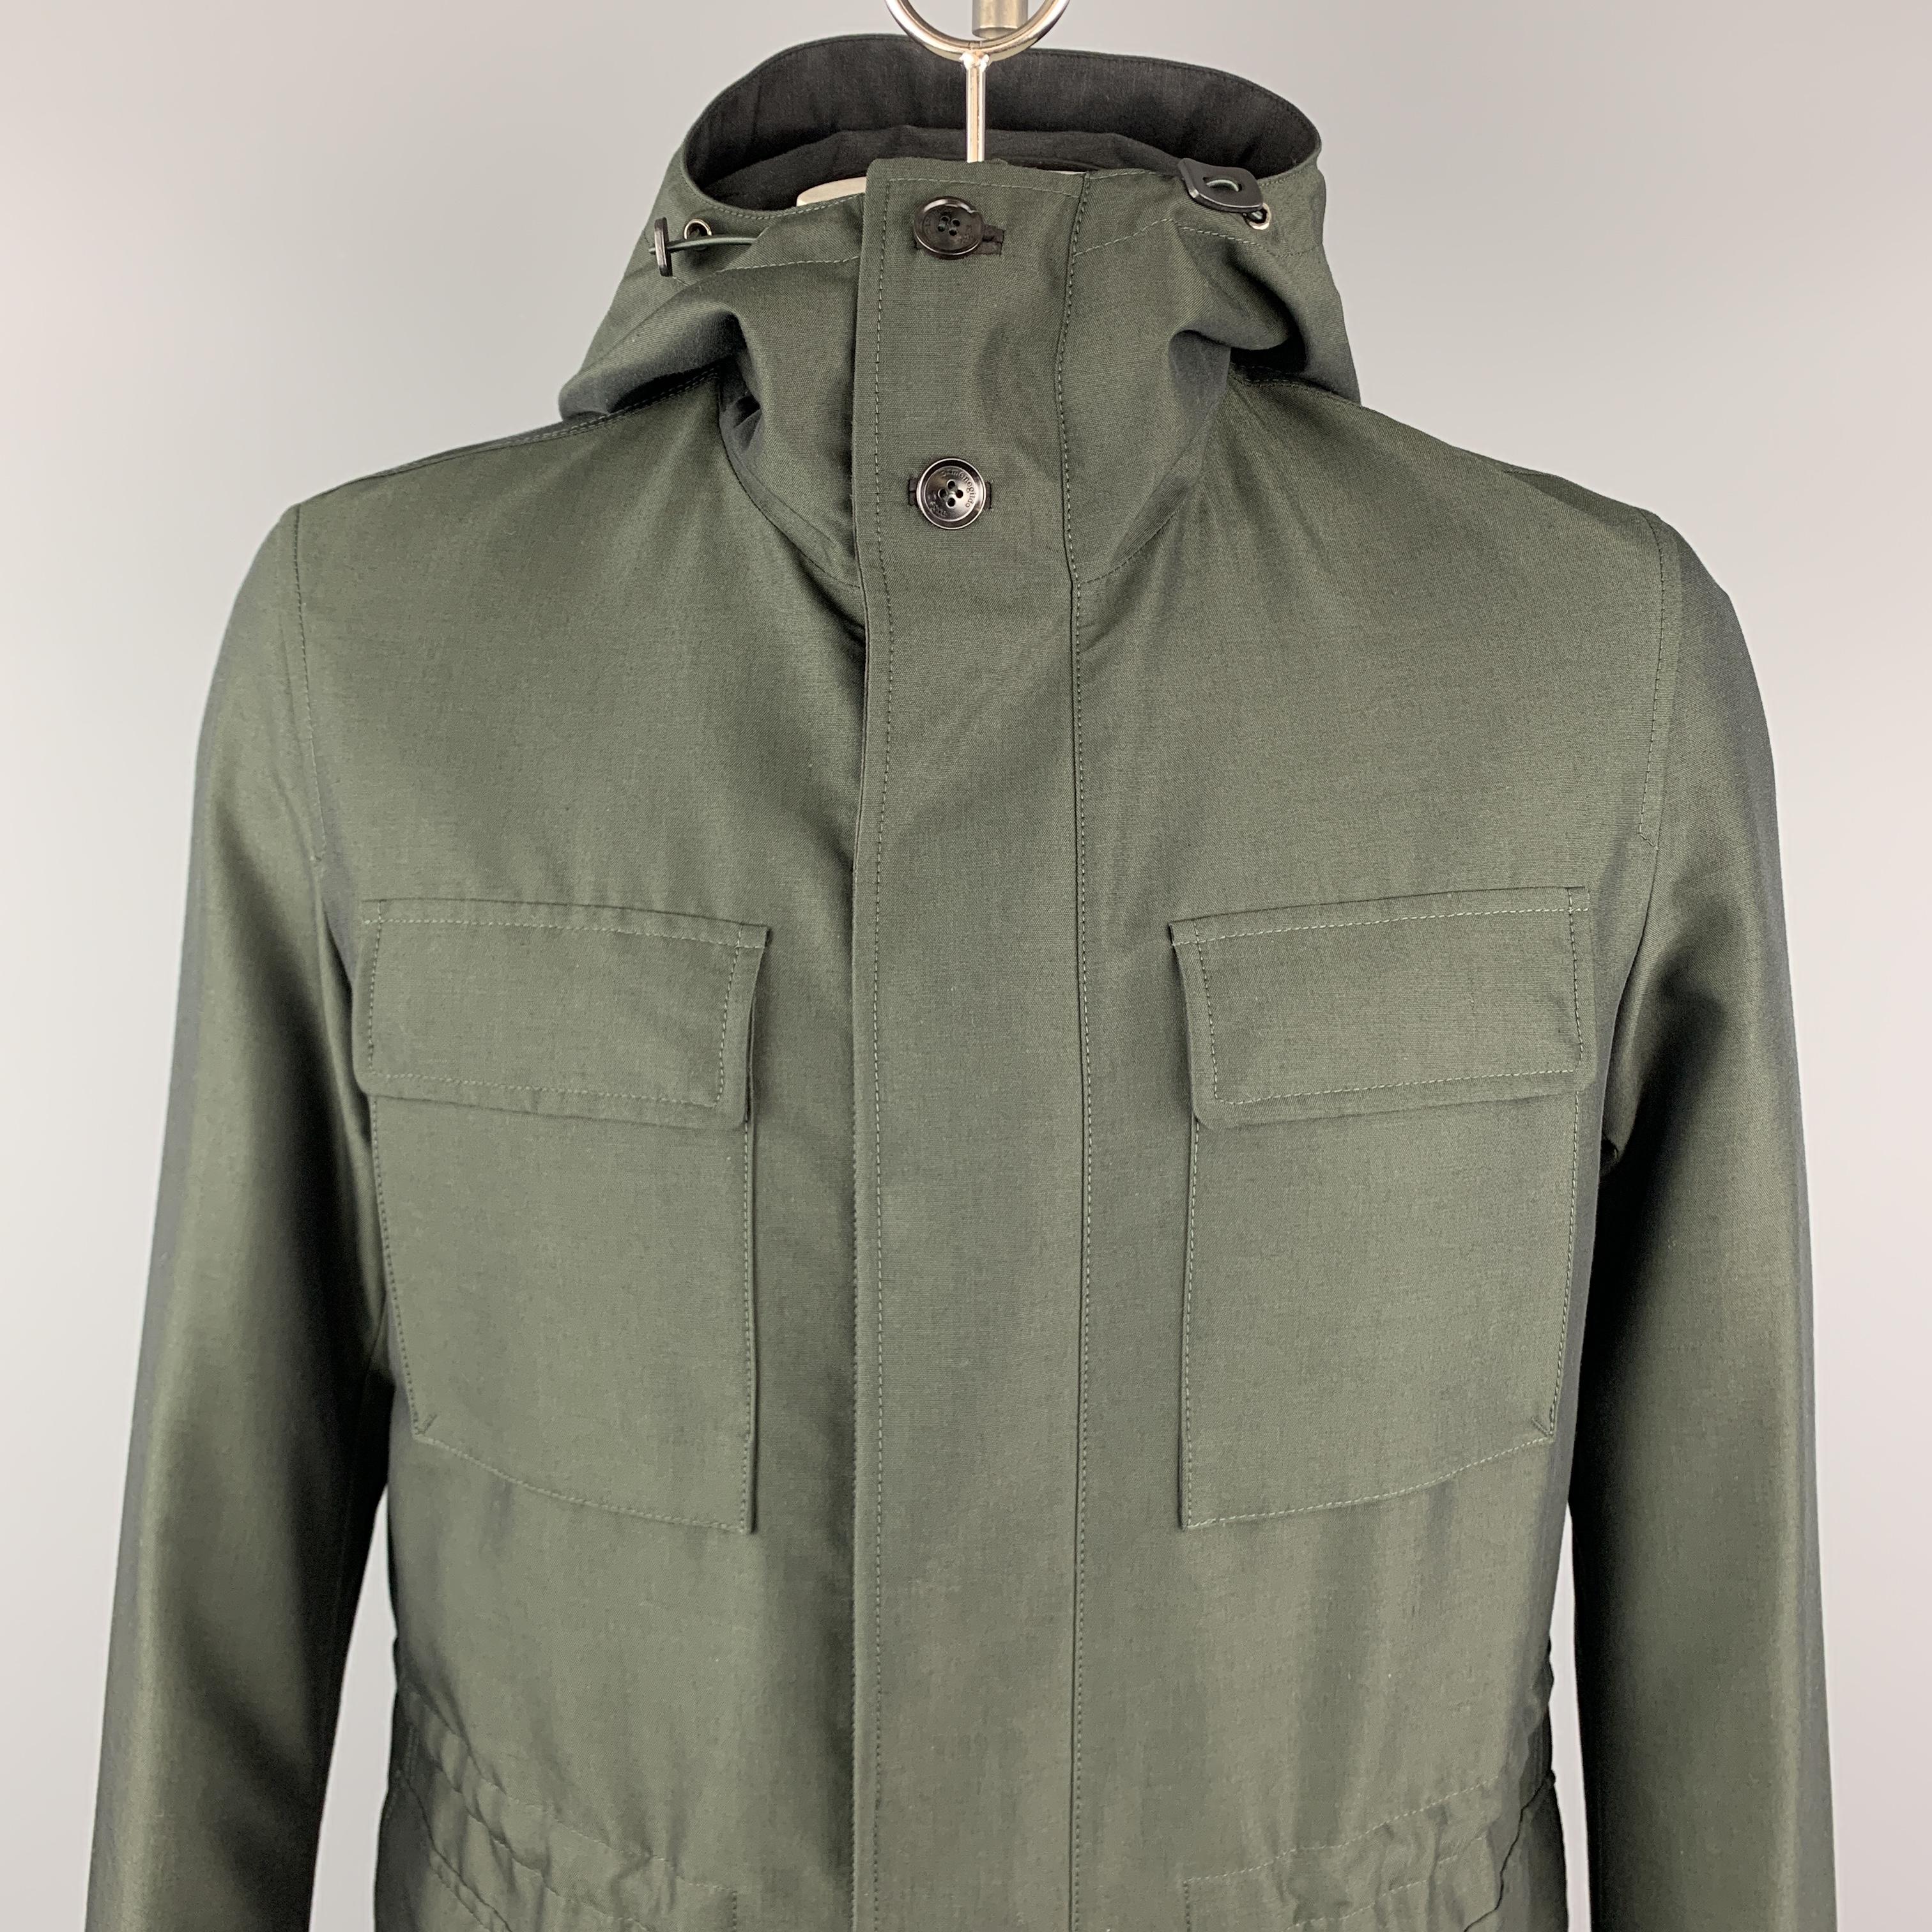 ERMENEGILDO ZEGNA anorak style coat comes in olive green wol cotton blend sharkskin with a high collar hood, zip front with hidden snap placket, drawstring waist, patch flap pockets, and brown suede trim. Made in Italy.

New with Tags.
Marked: IT